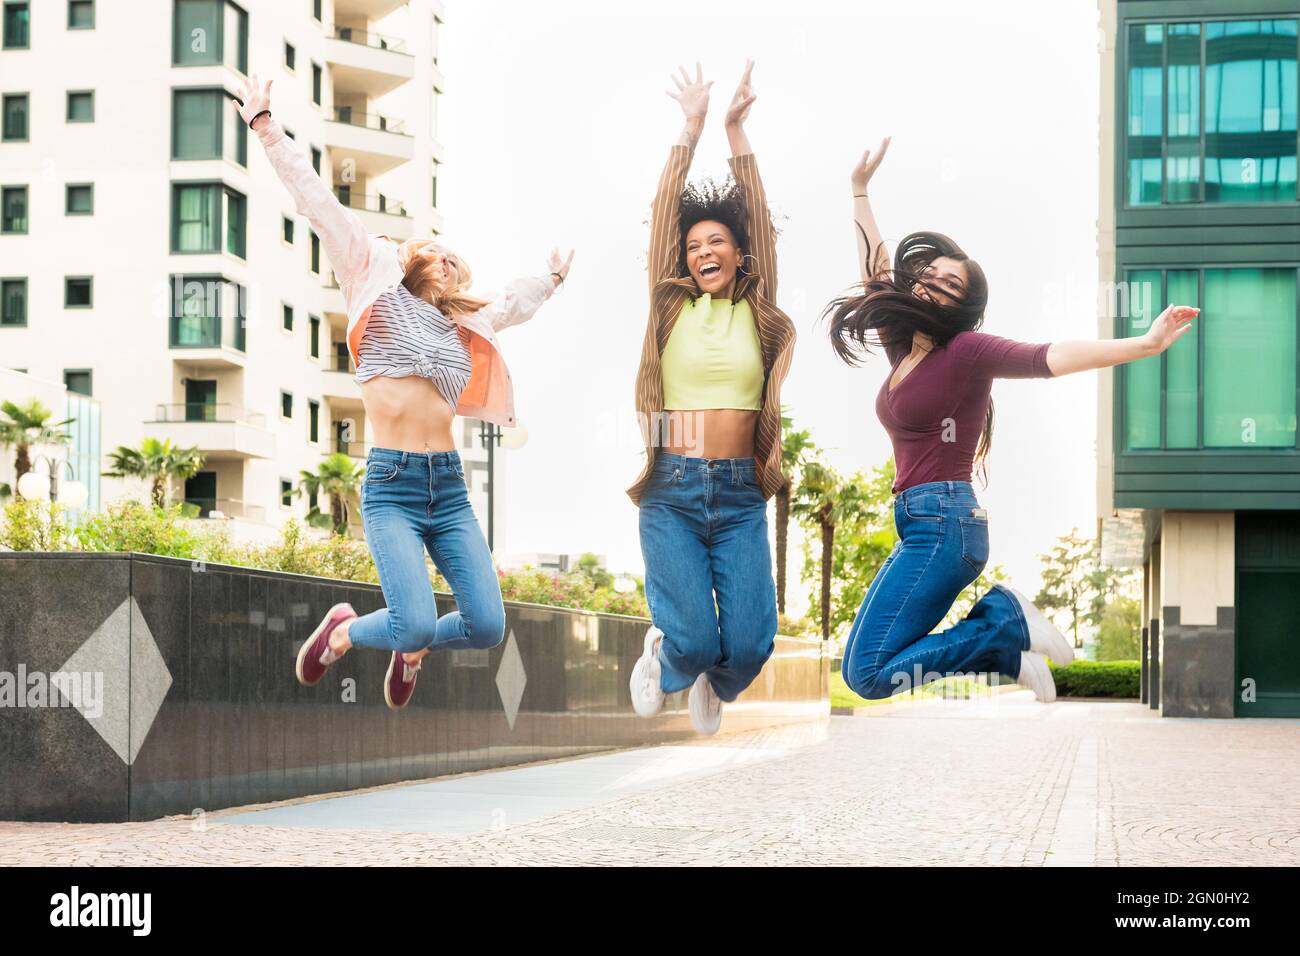 Three exuberant happy young woman celebrating leaping into the air together laughing and cheering in a city street Stock Photo